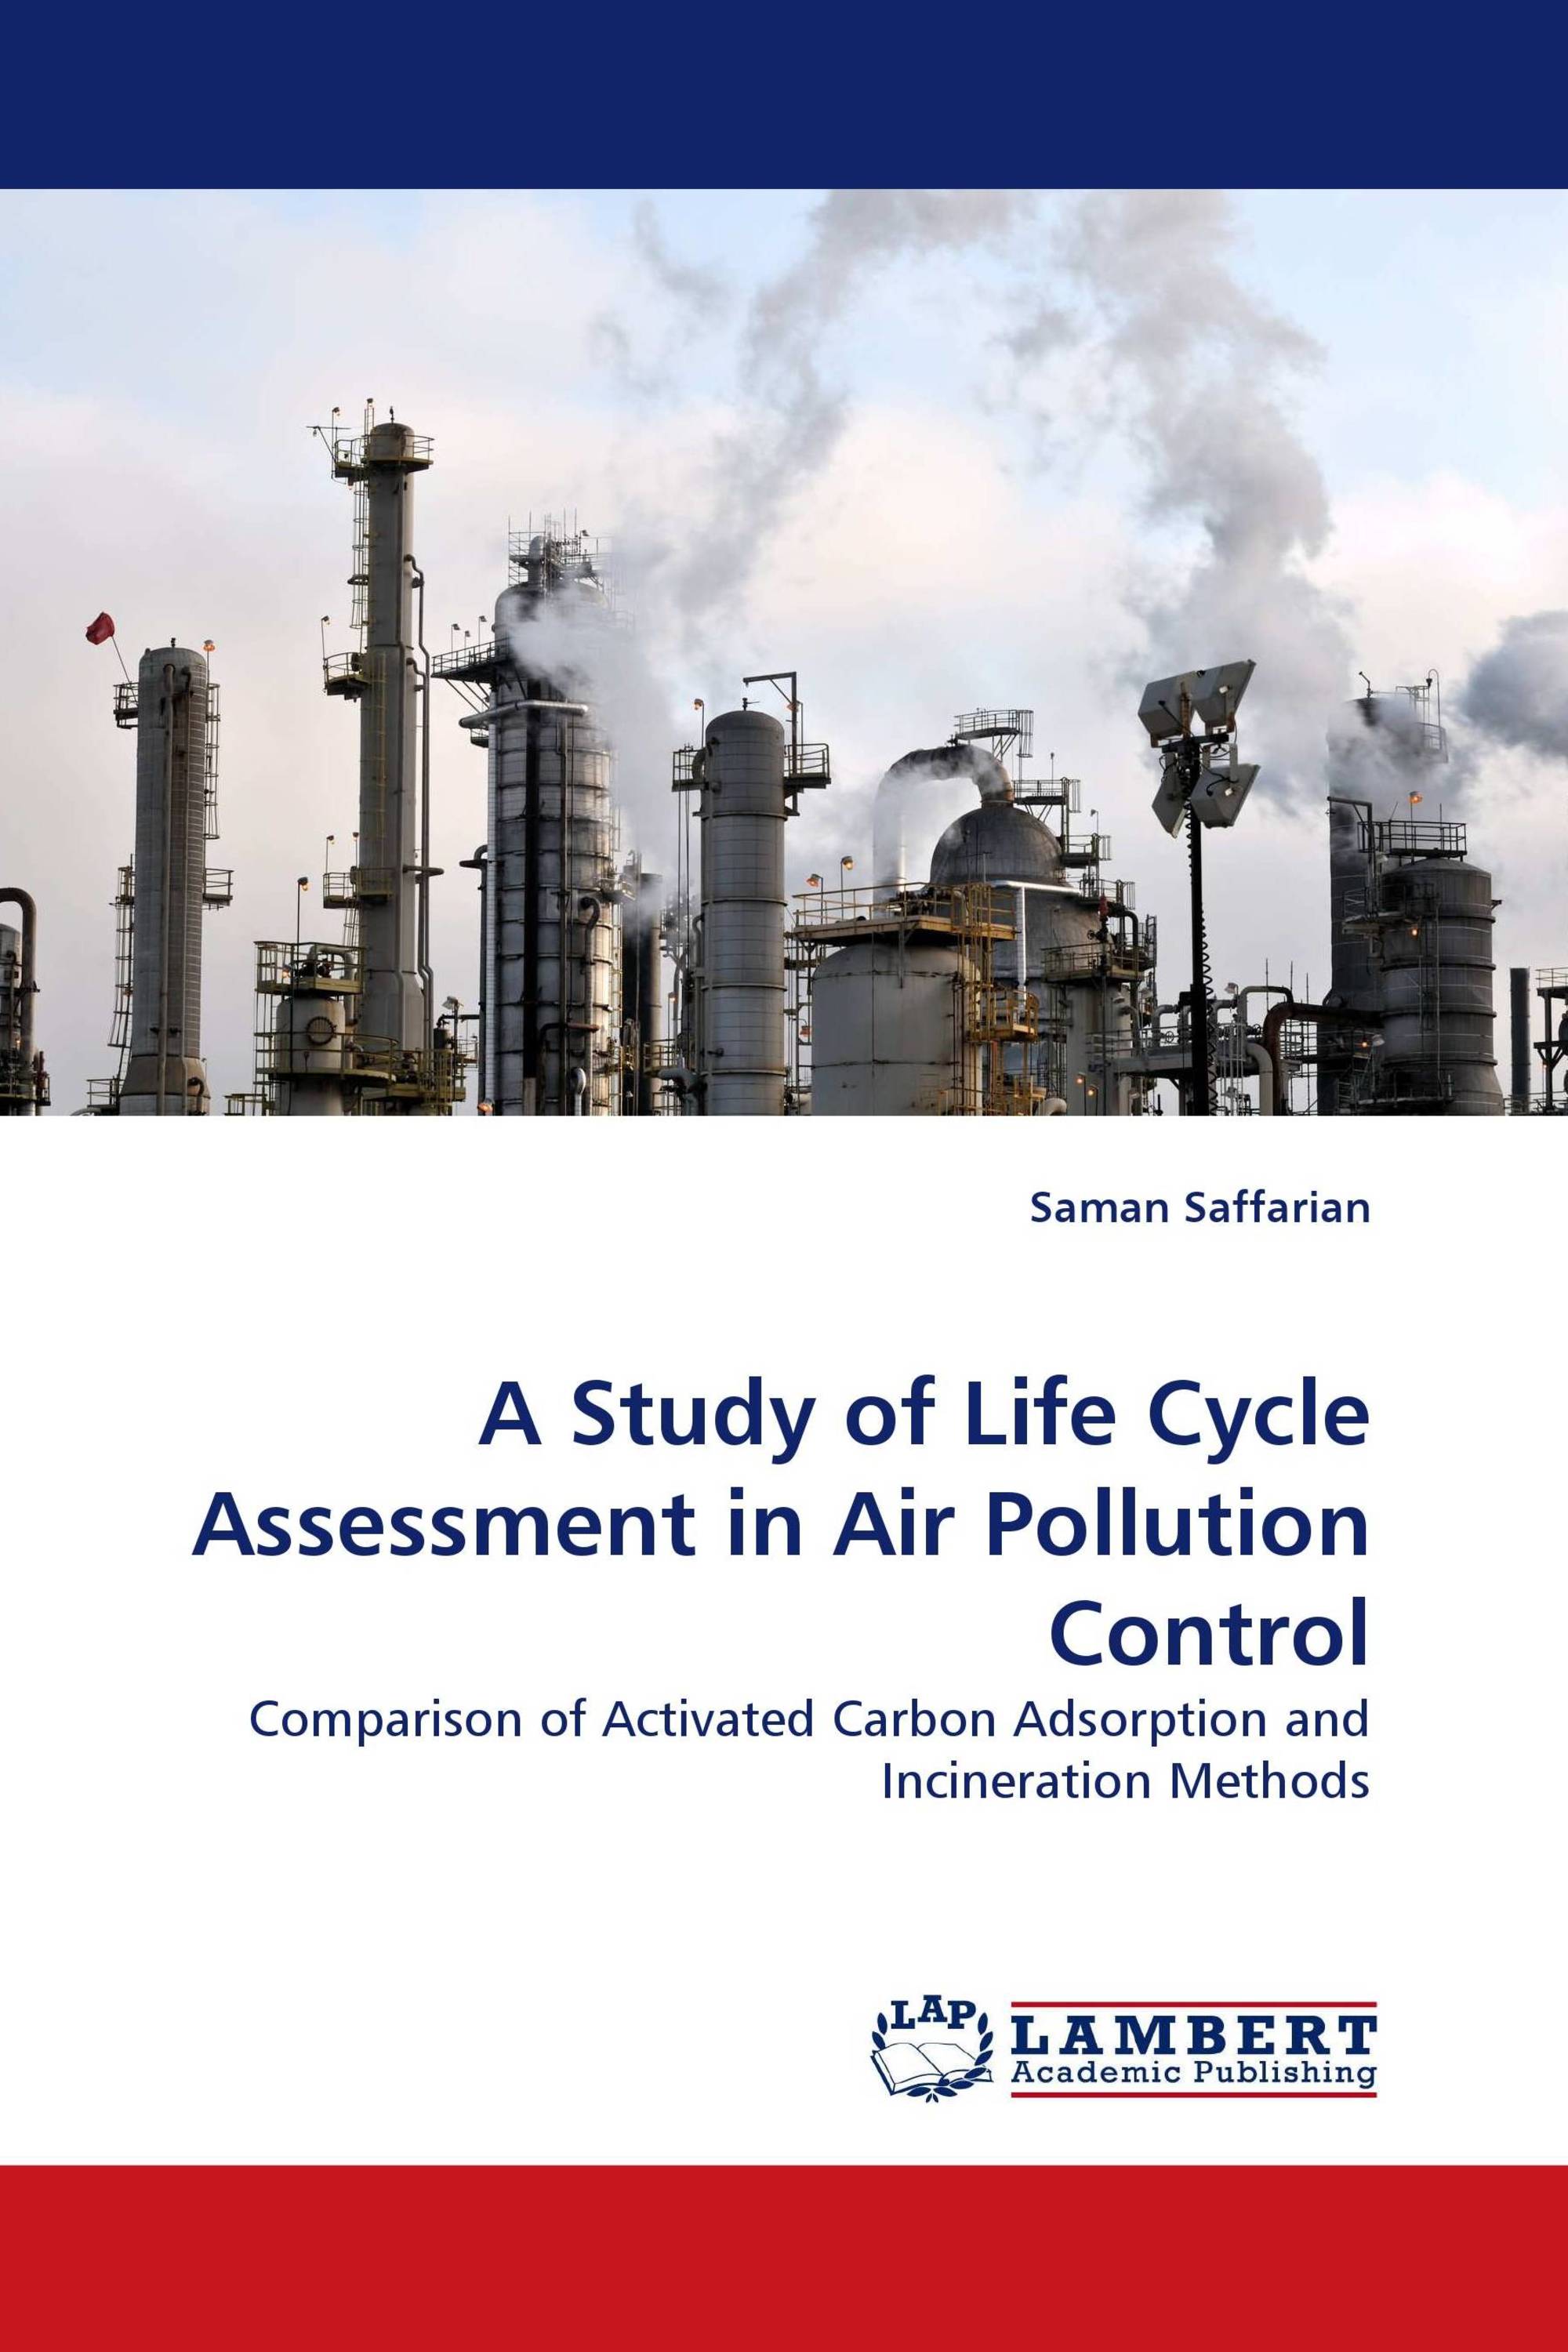 A Study of Life Cycle Assessment in Air Pollution Control